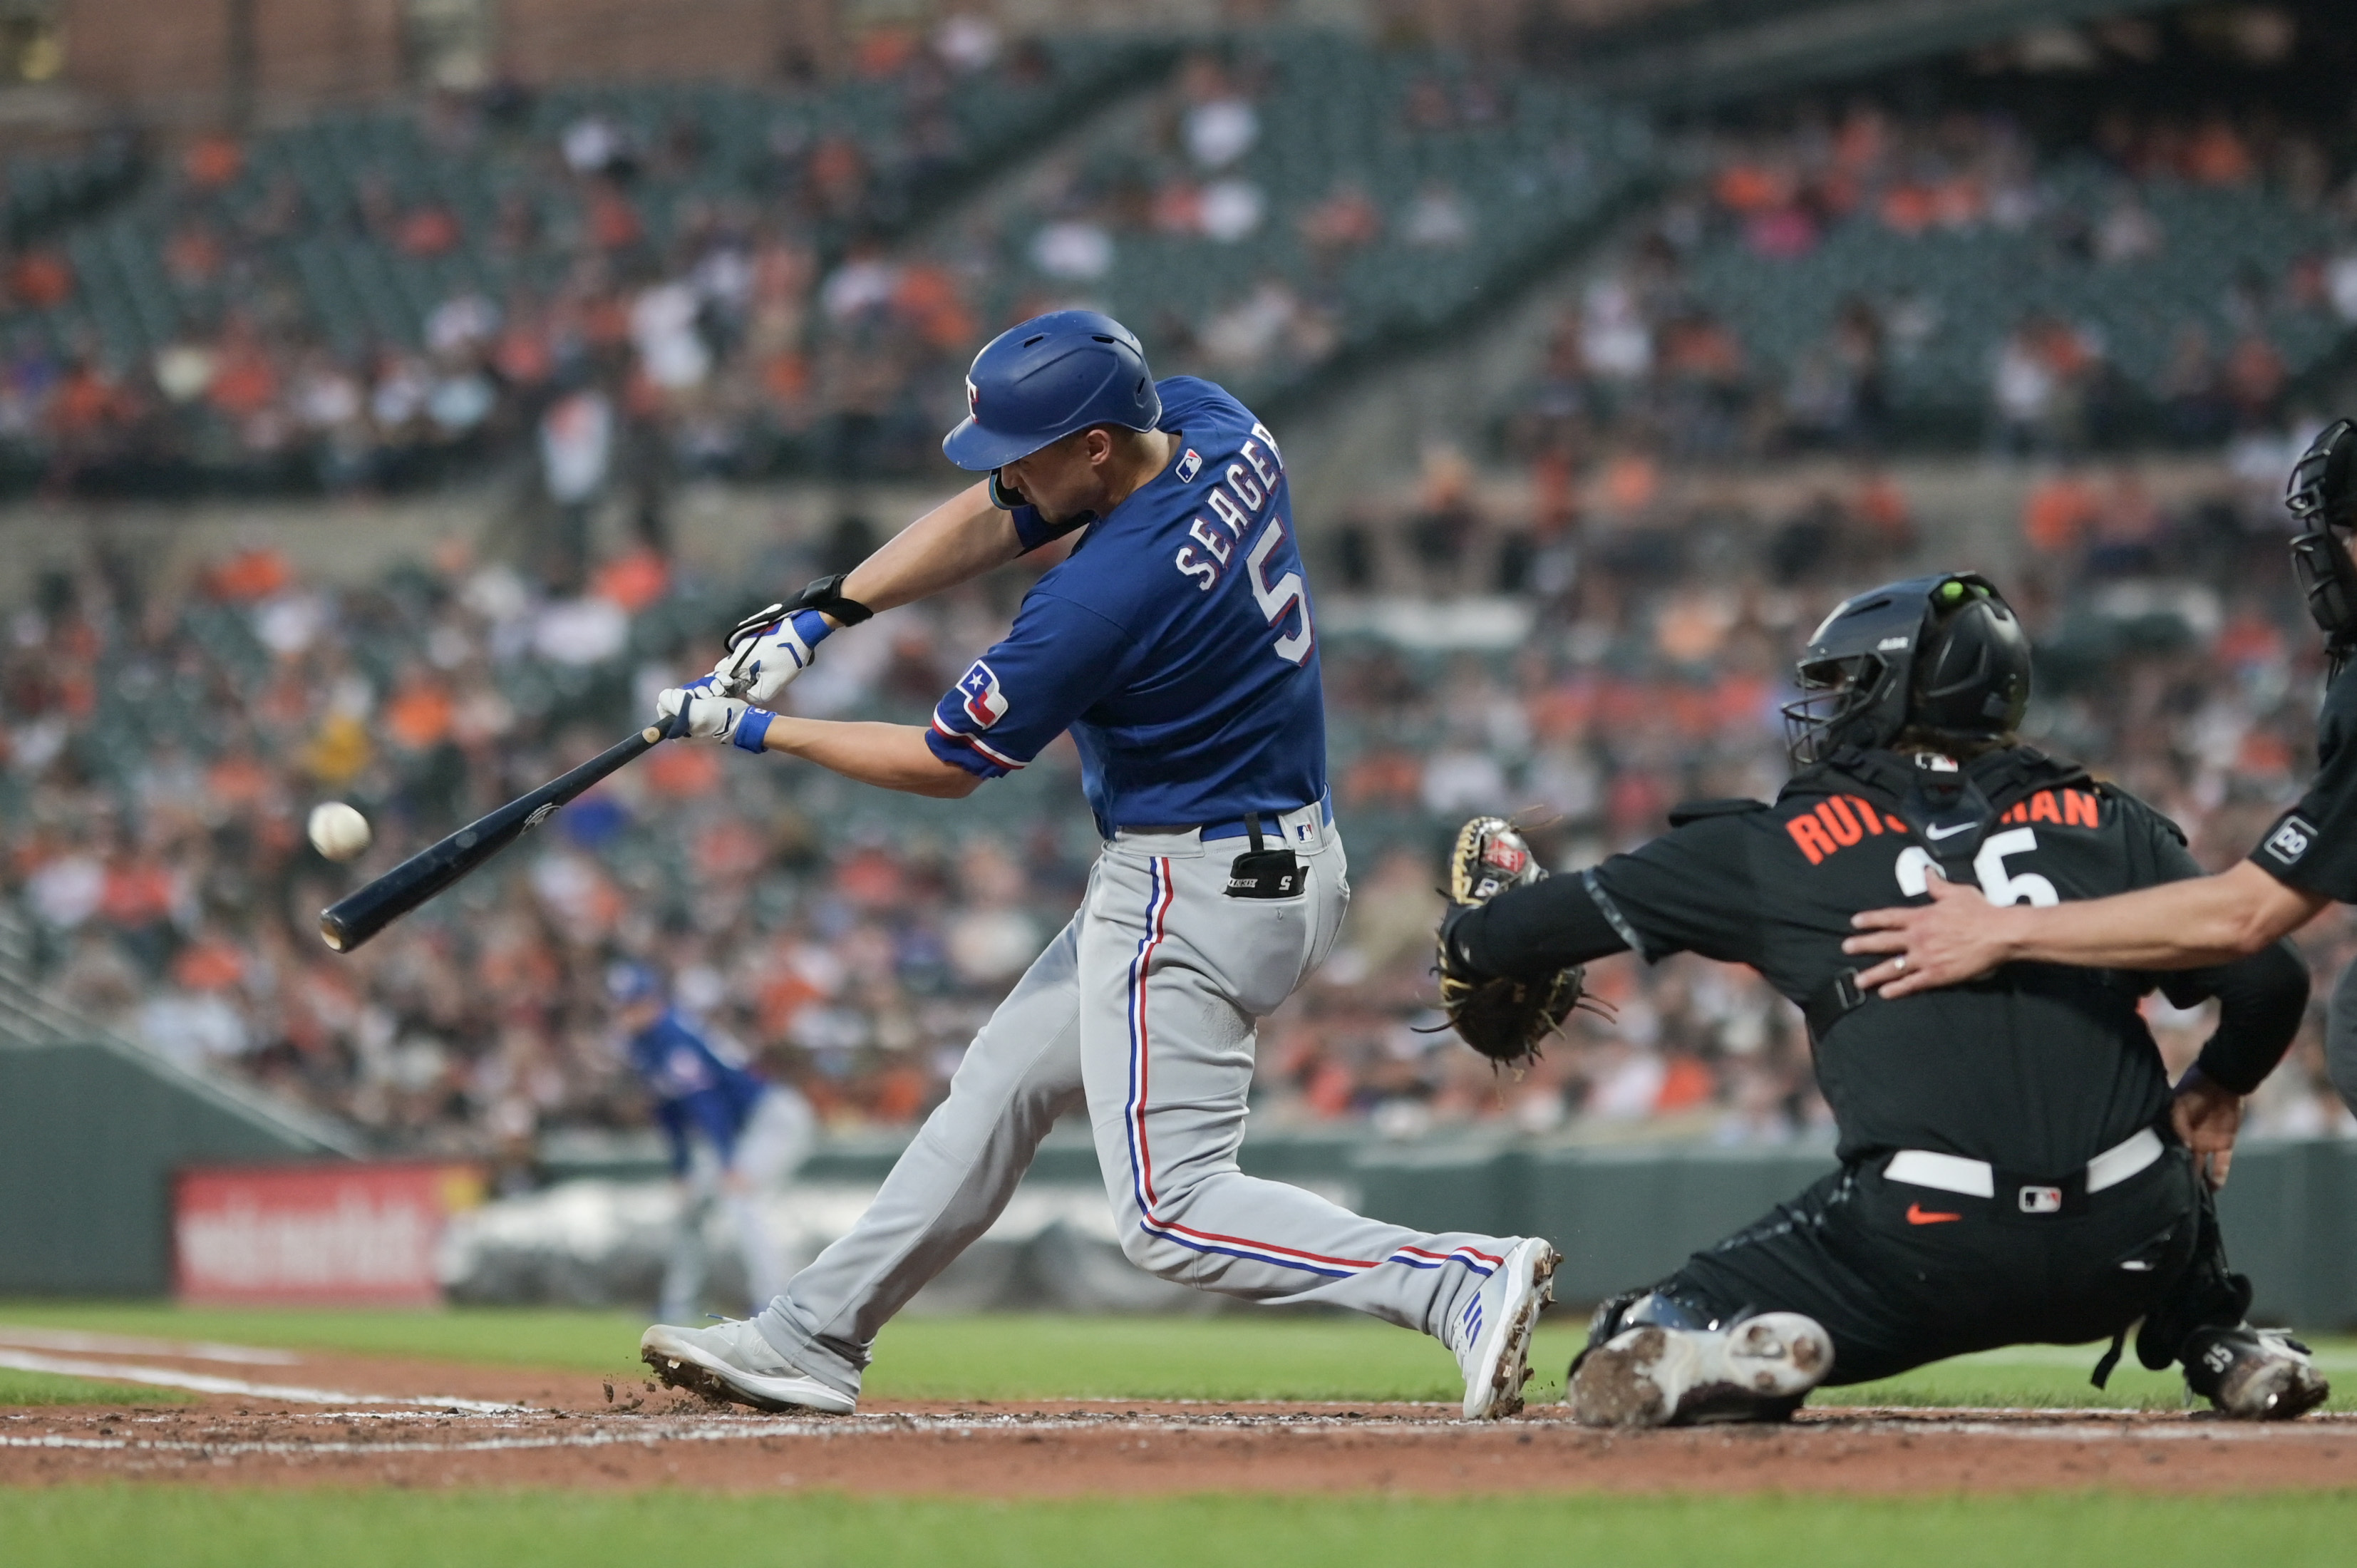 Rangers put up a five-run inning against the Orioles with base